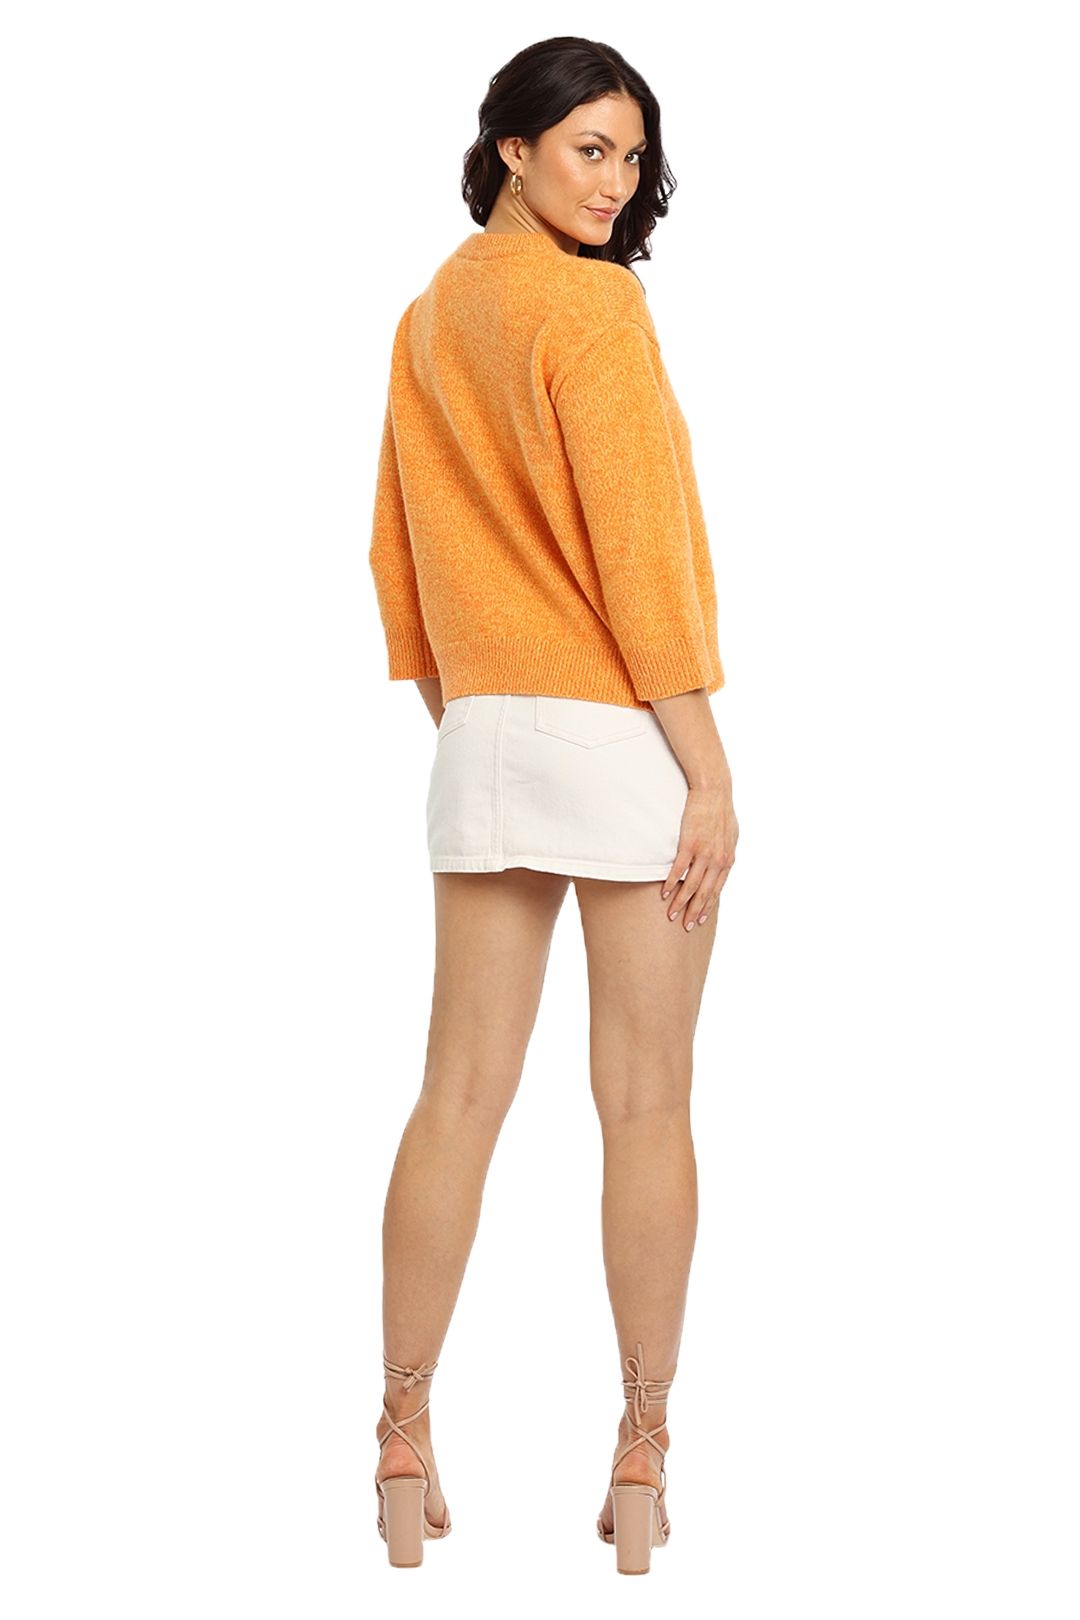 Jac + Jack Quil Long Sleeve Sweater Relaxed Fit